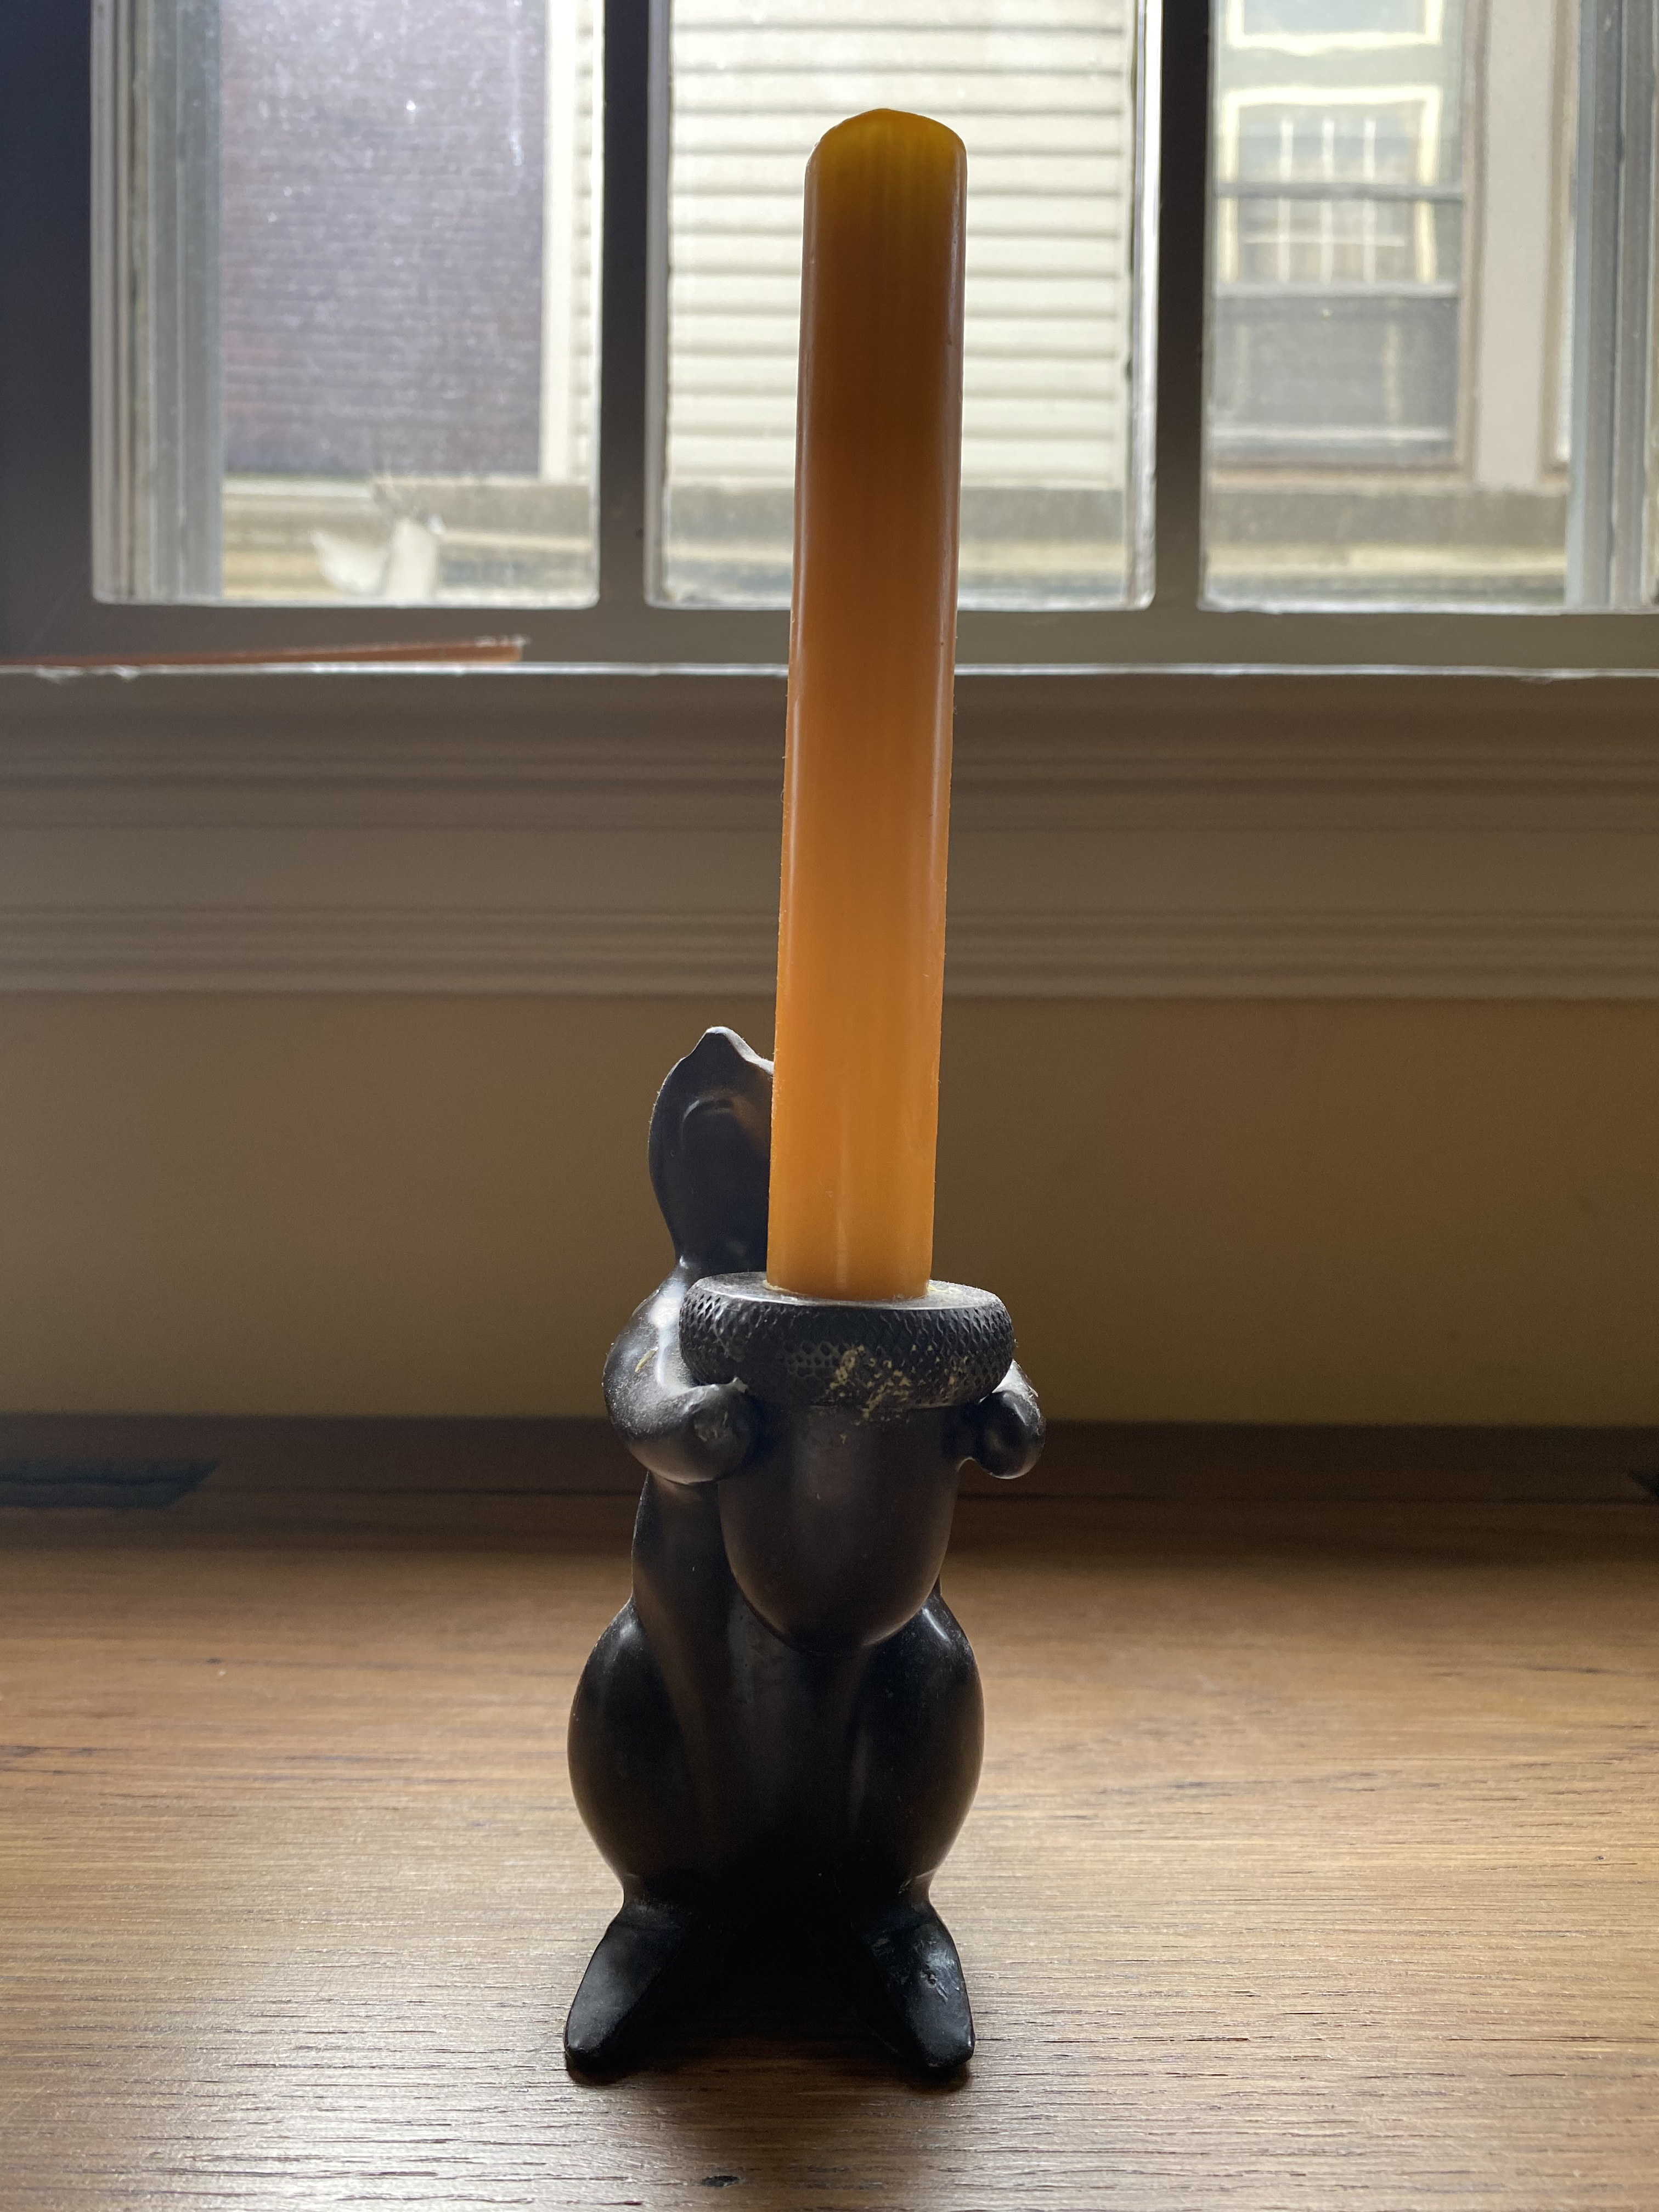 the front of a squirrel candle holder, the squirrel holds an acorn, out of which a candle grows. the squirrel gazes up at the candle